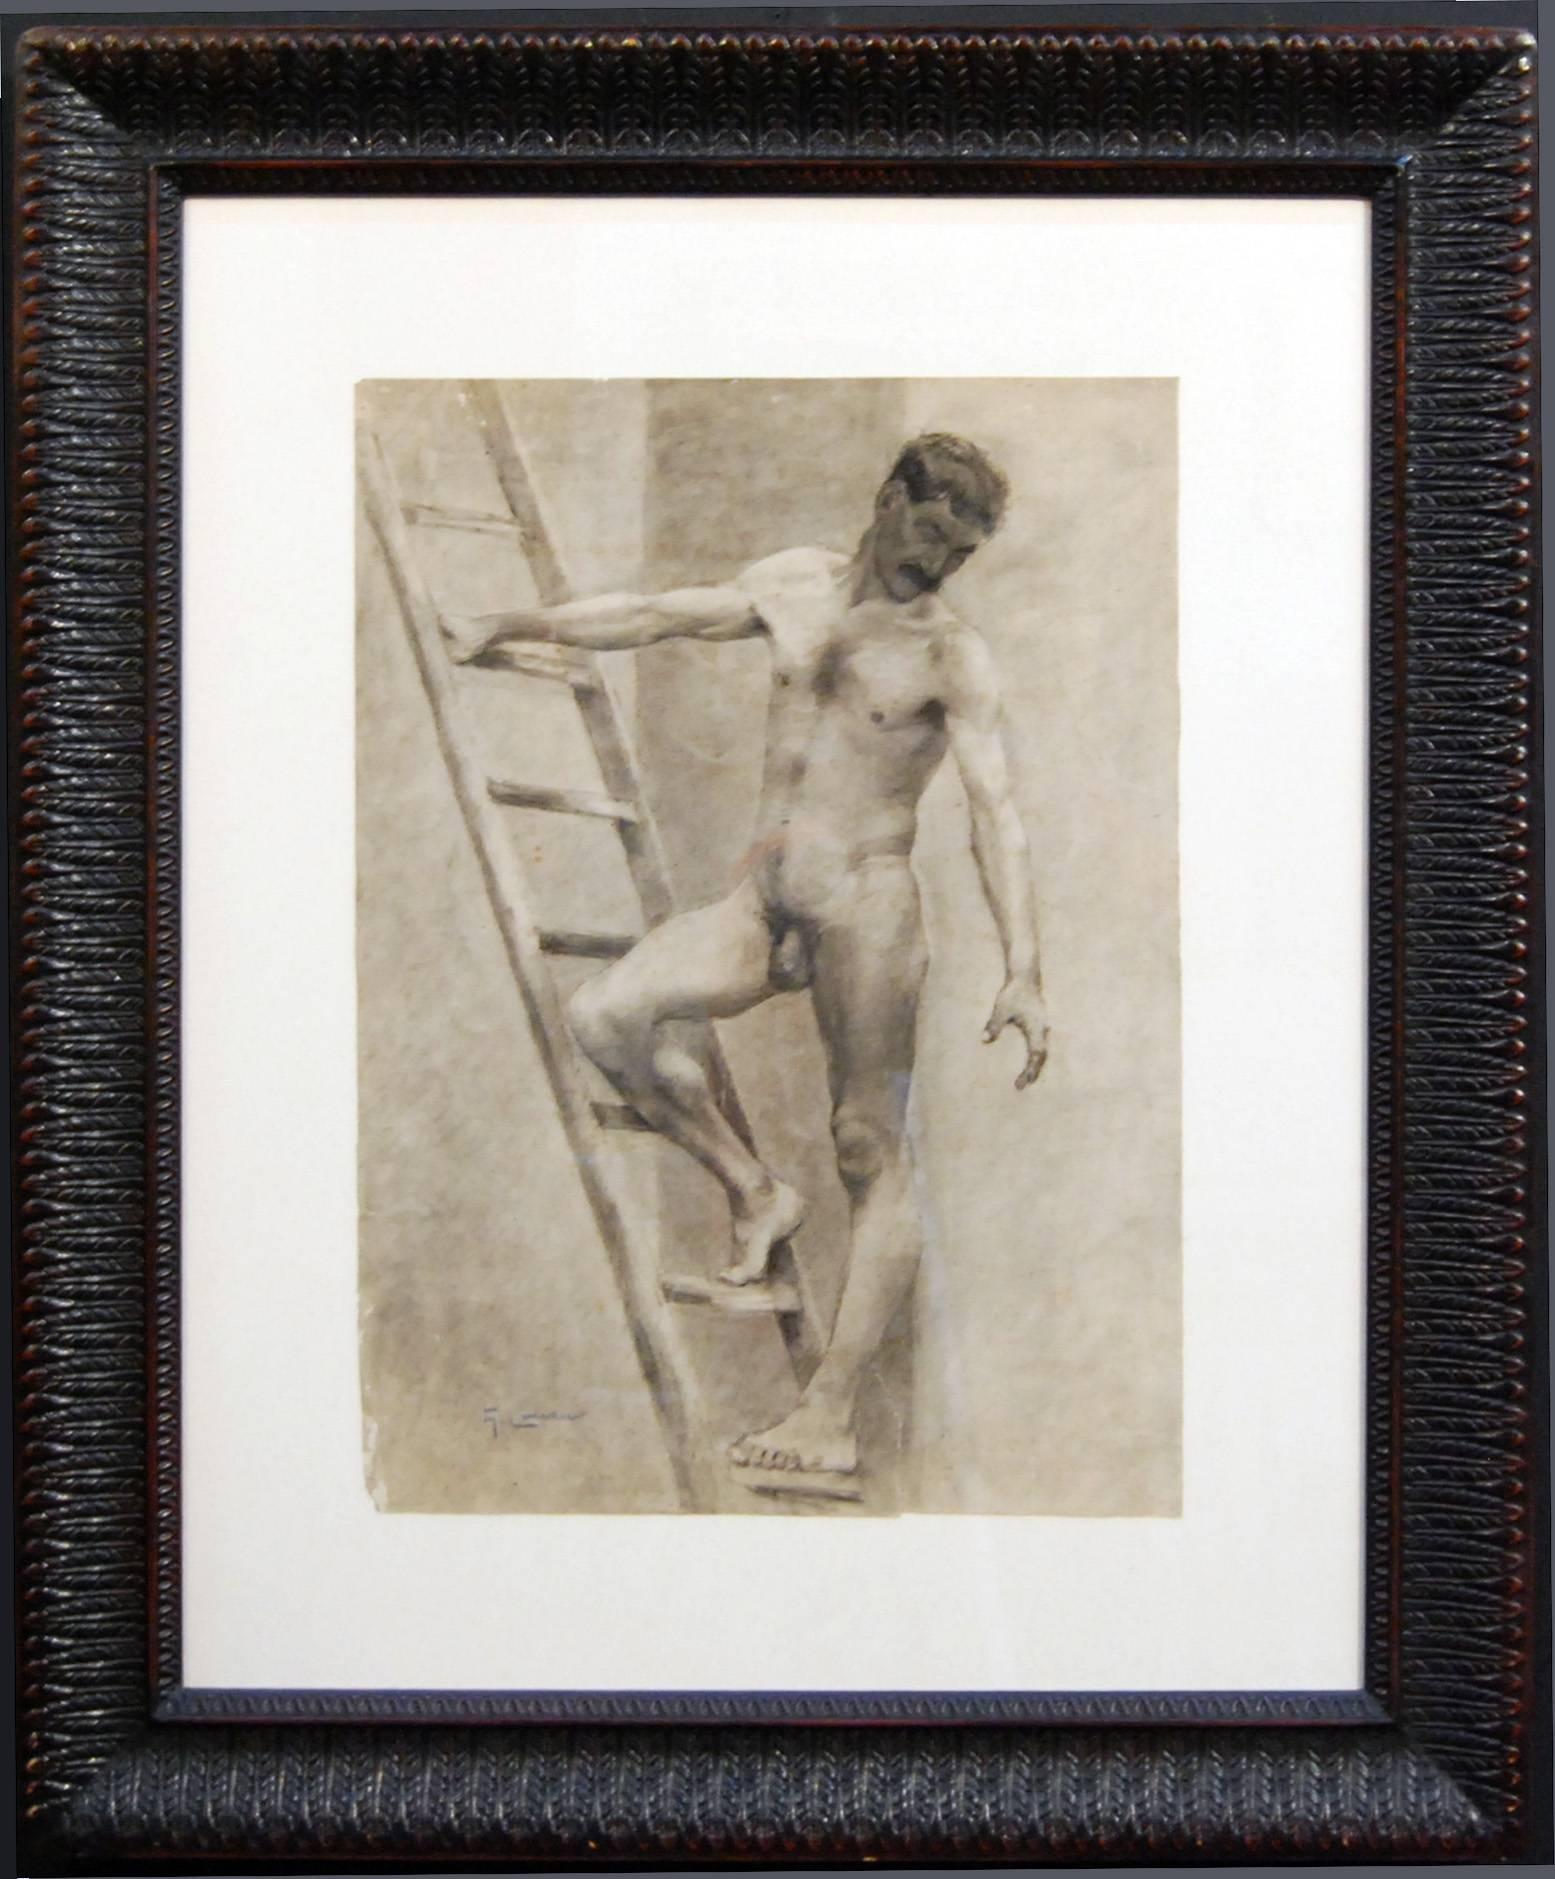 Nude Painting Gennaro Luciano - DRAWING OF ACKED MAN ON LADDER